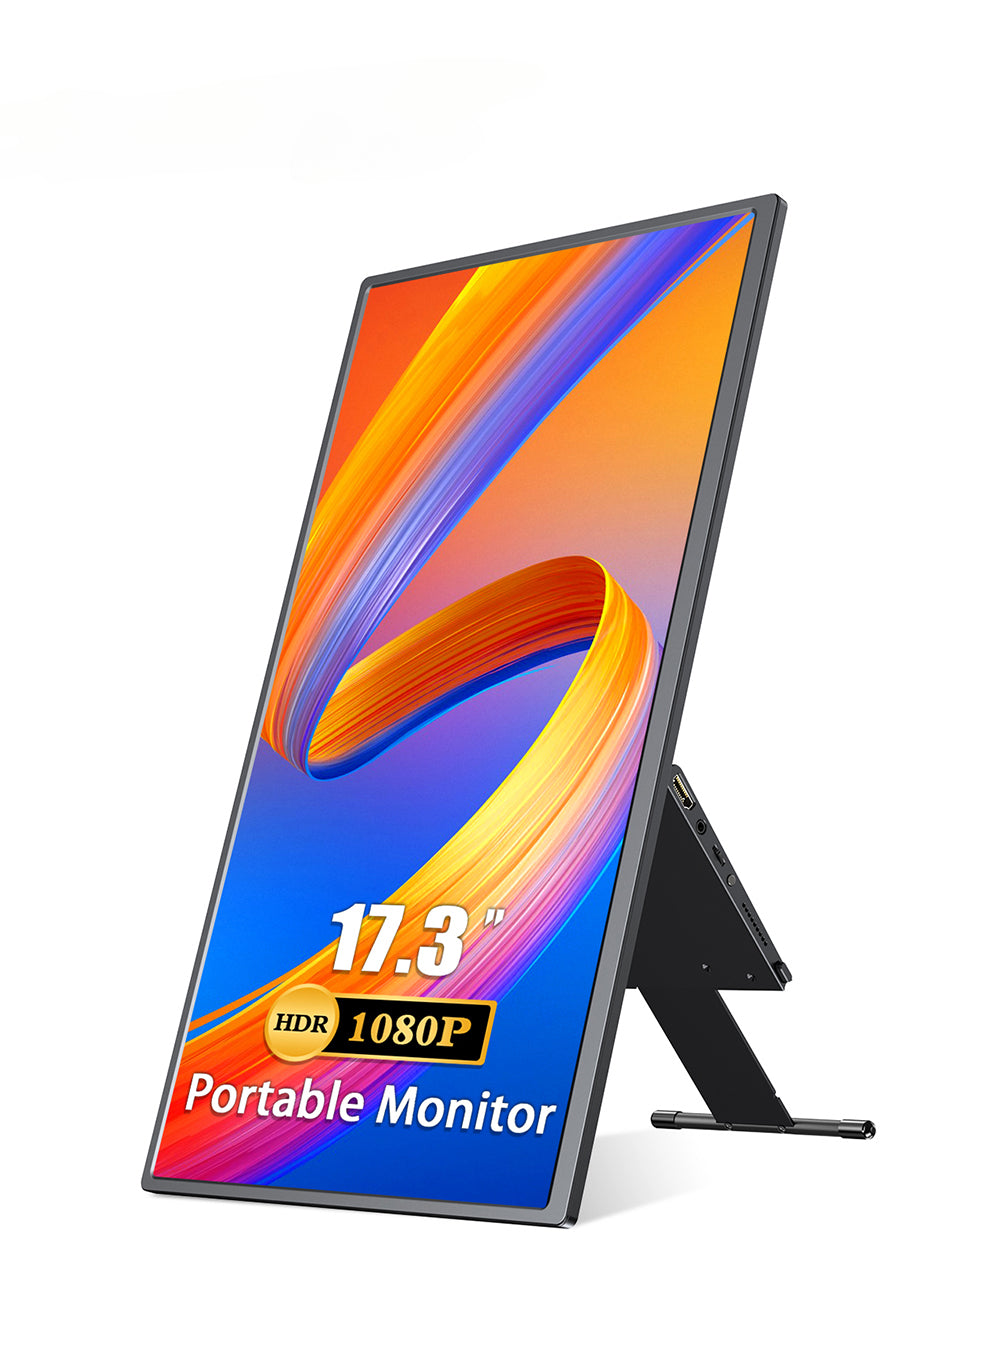 17.3/15.6 inch IPS Ultra Slim Monitor Portable 1080P HDR HDMI Type-C Display